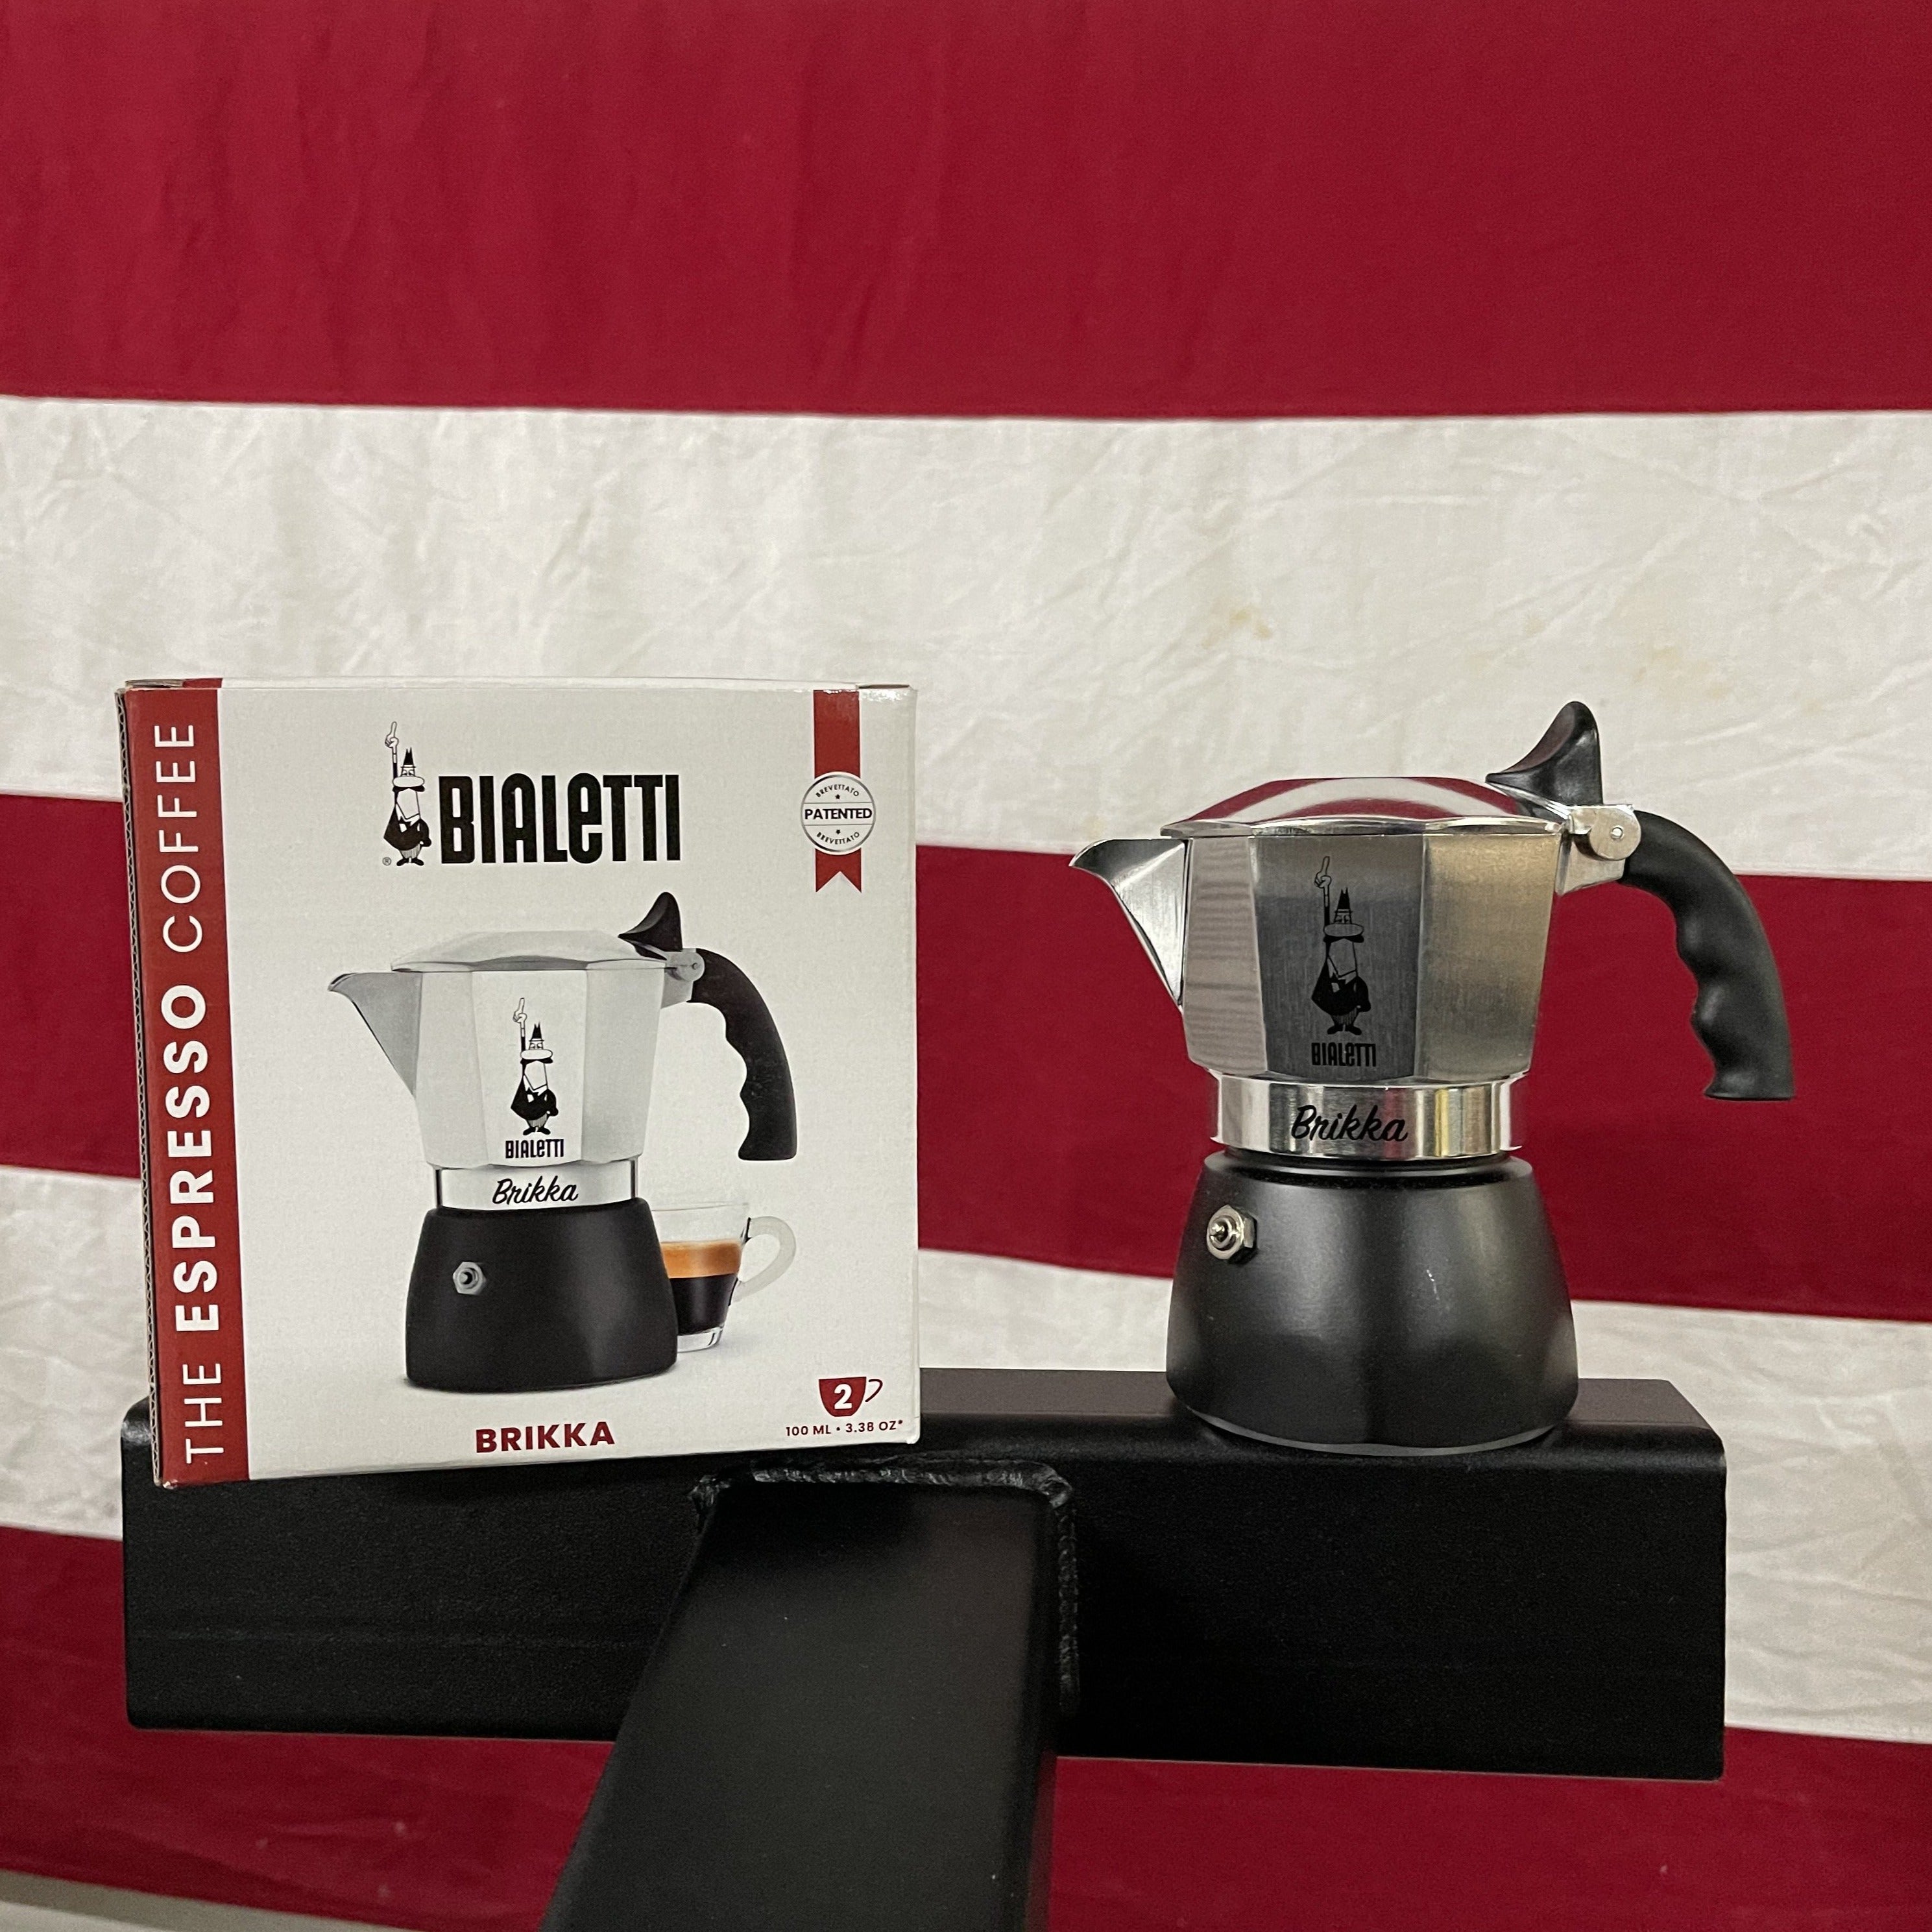 Bialetti Brikka 2020 review, how to clean and fix by Avi - Schneor